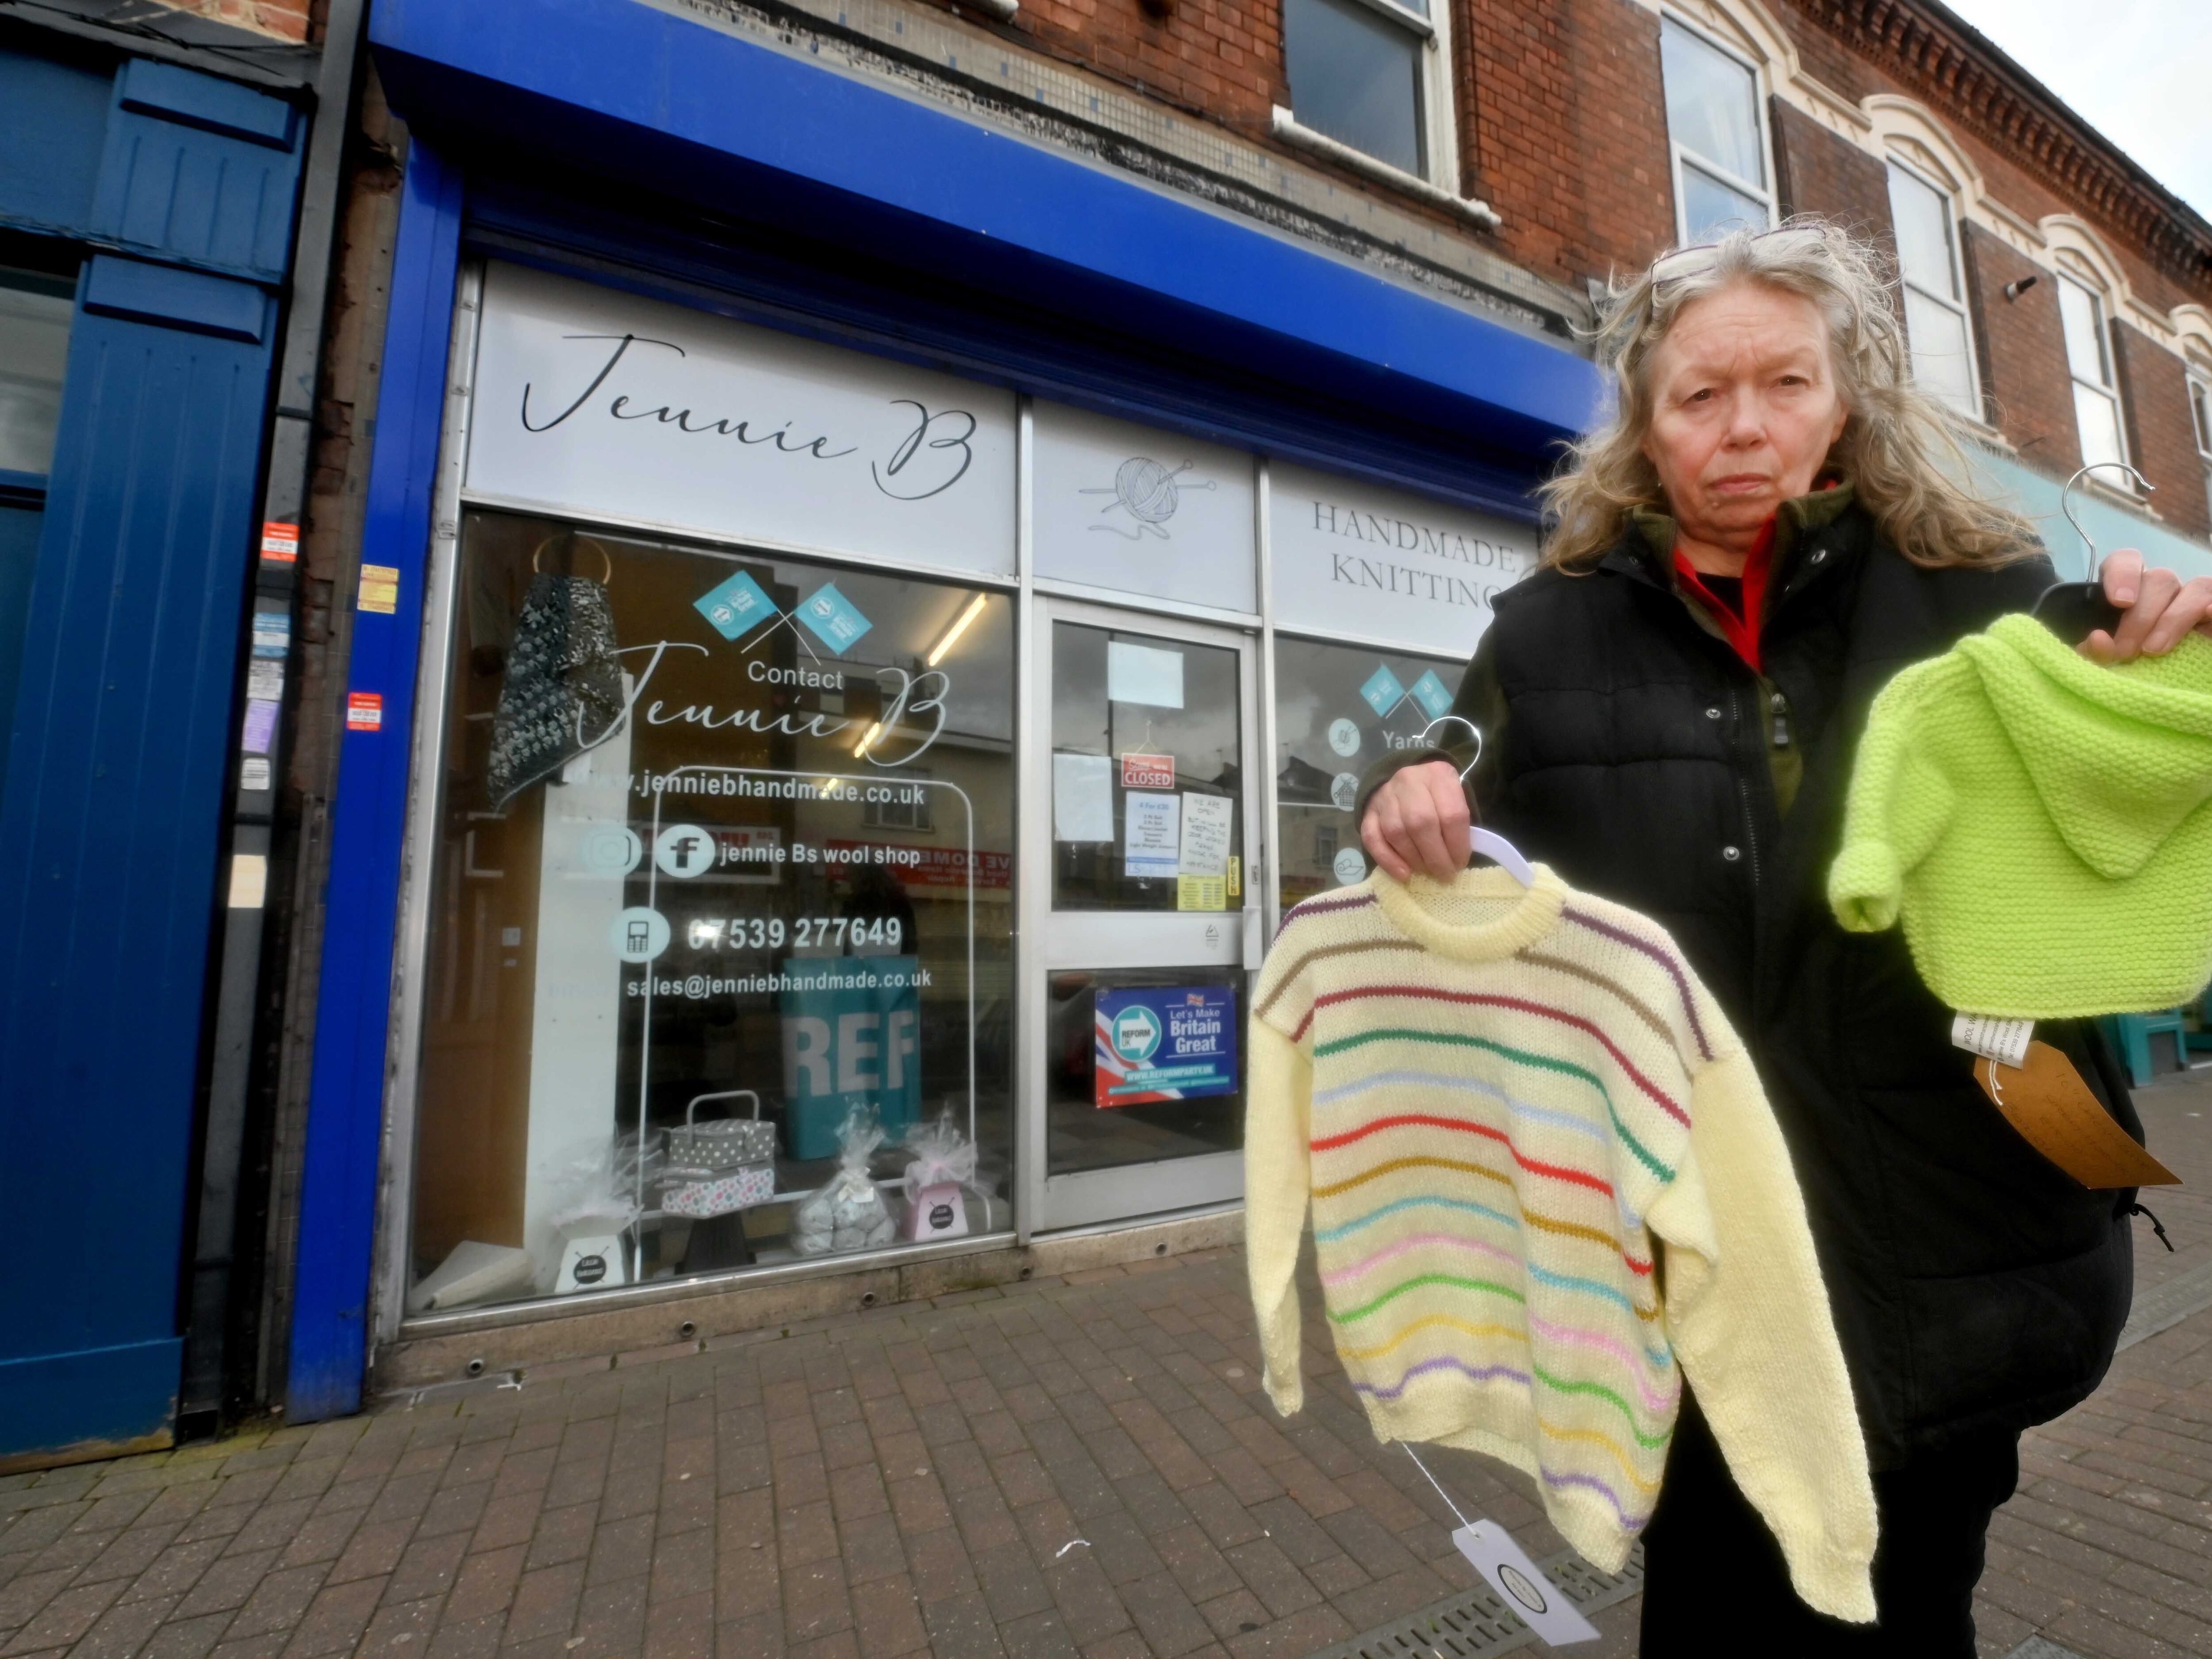 'I feel like giving up' - popular trader given three days to leave shop after she was burgled